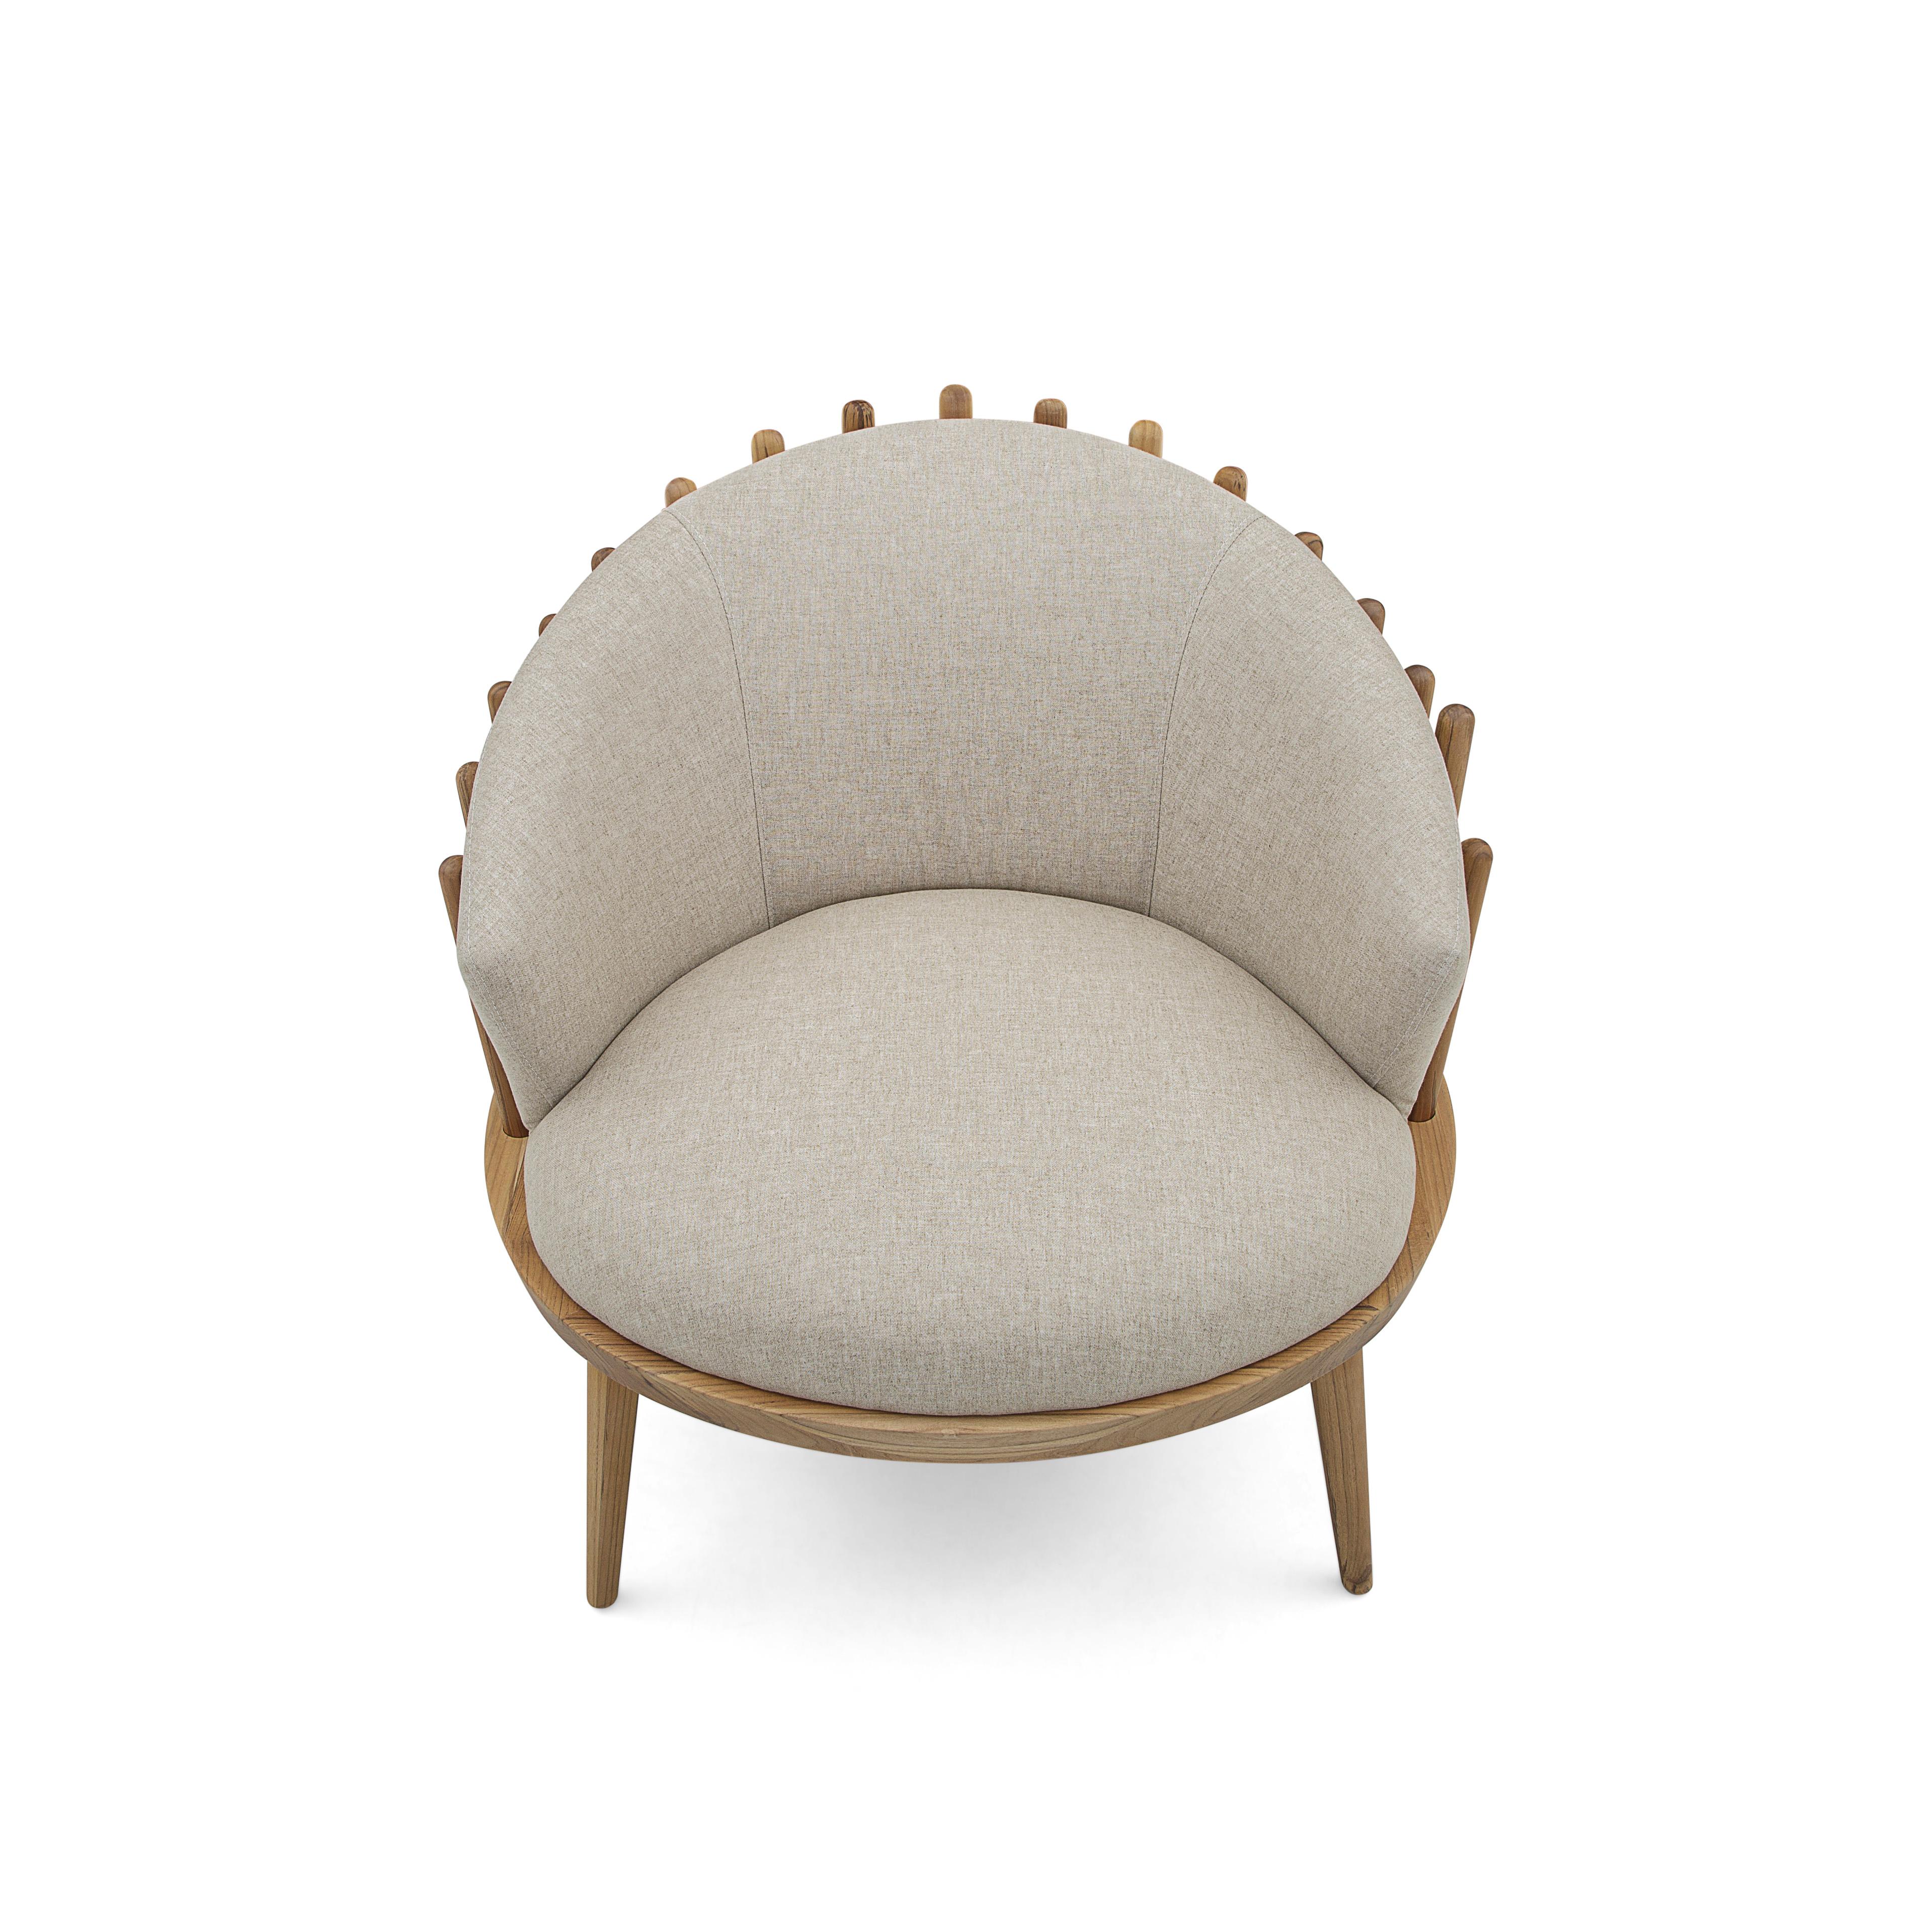 Brazilian Fane Upholstered Armchair in Teak Wood Finish and Beige Fabric For Sale